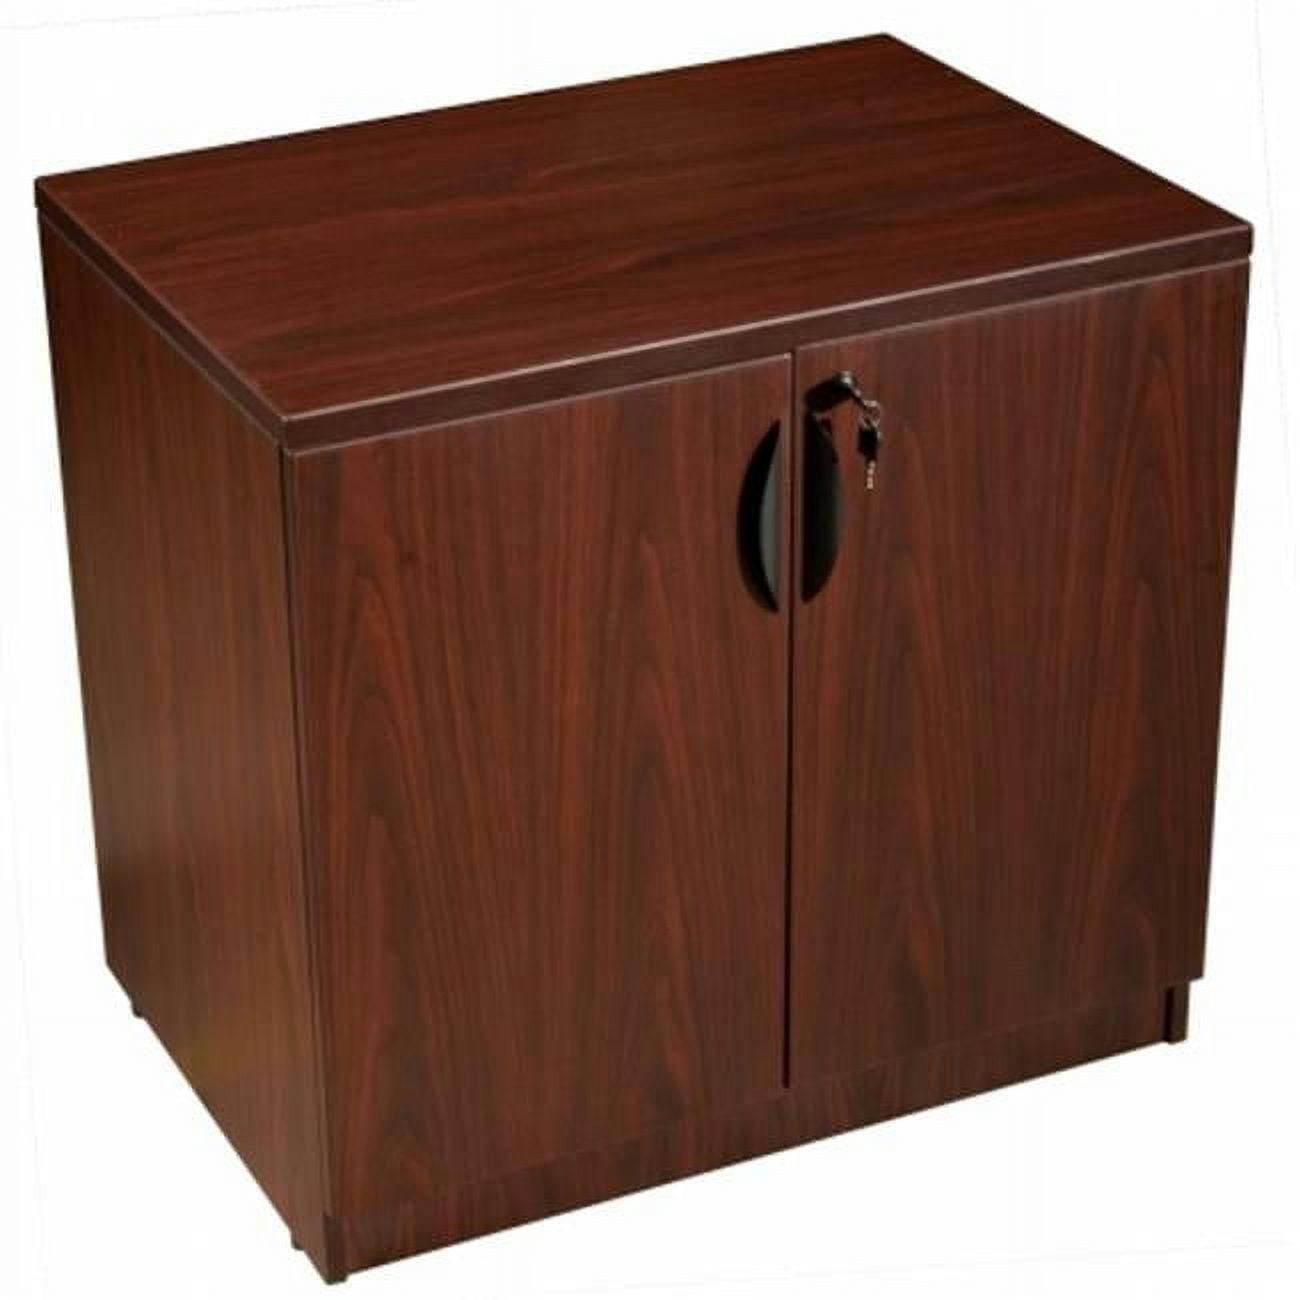 Traditional Mahogany Freestanding Lockable Filing Cabinet with Adjustable Shelving